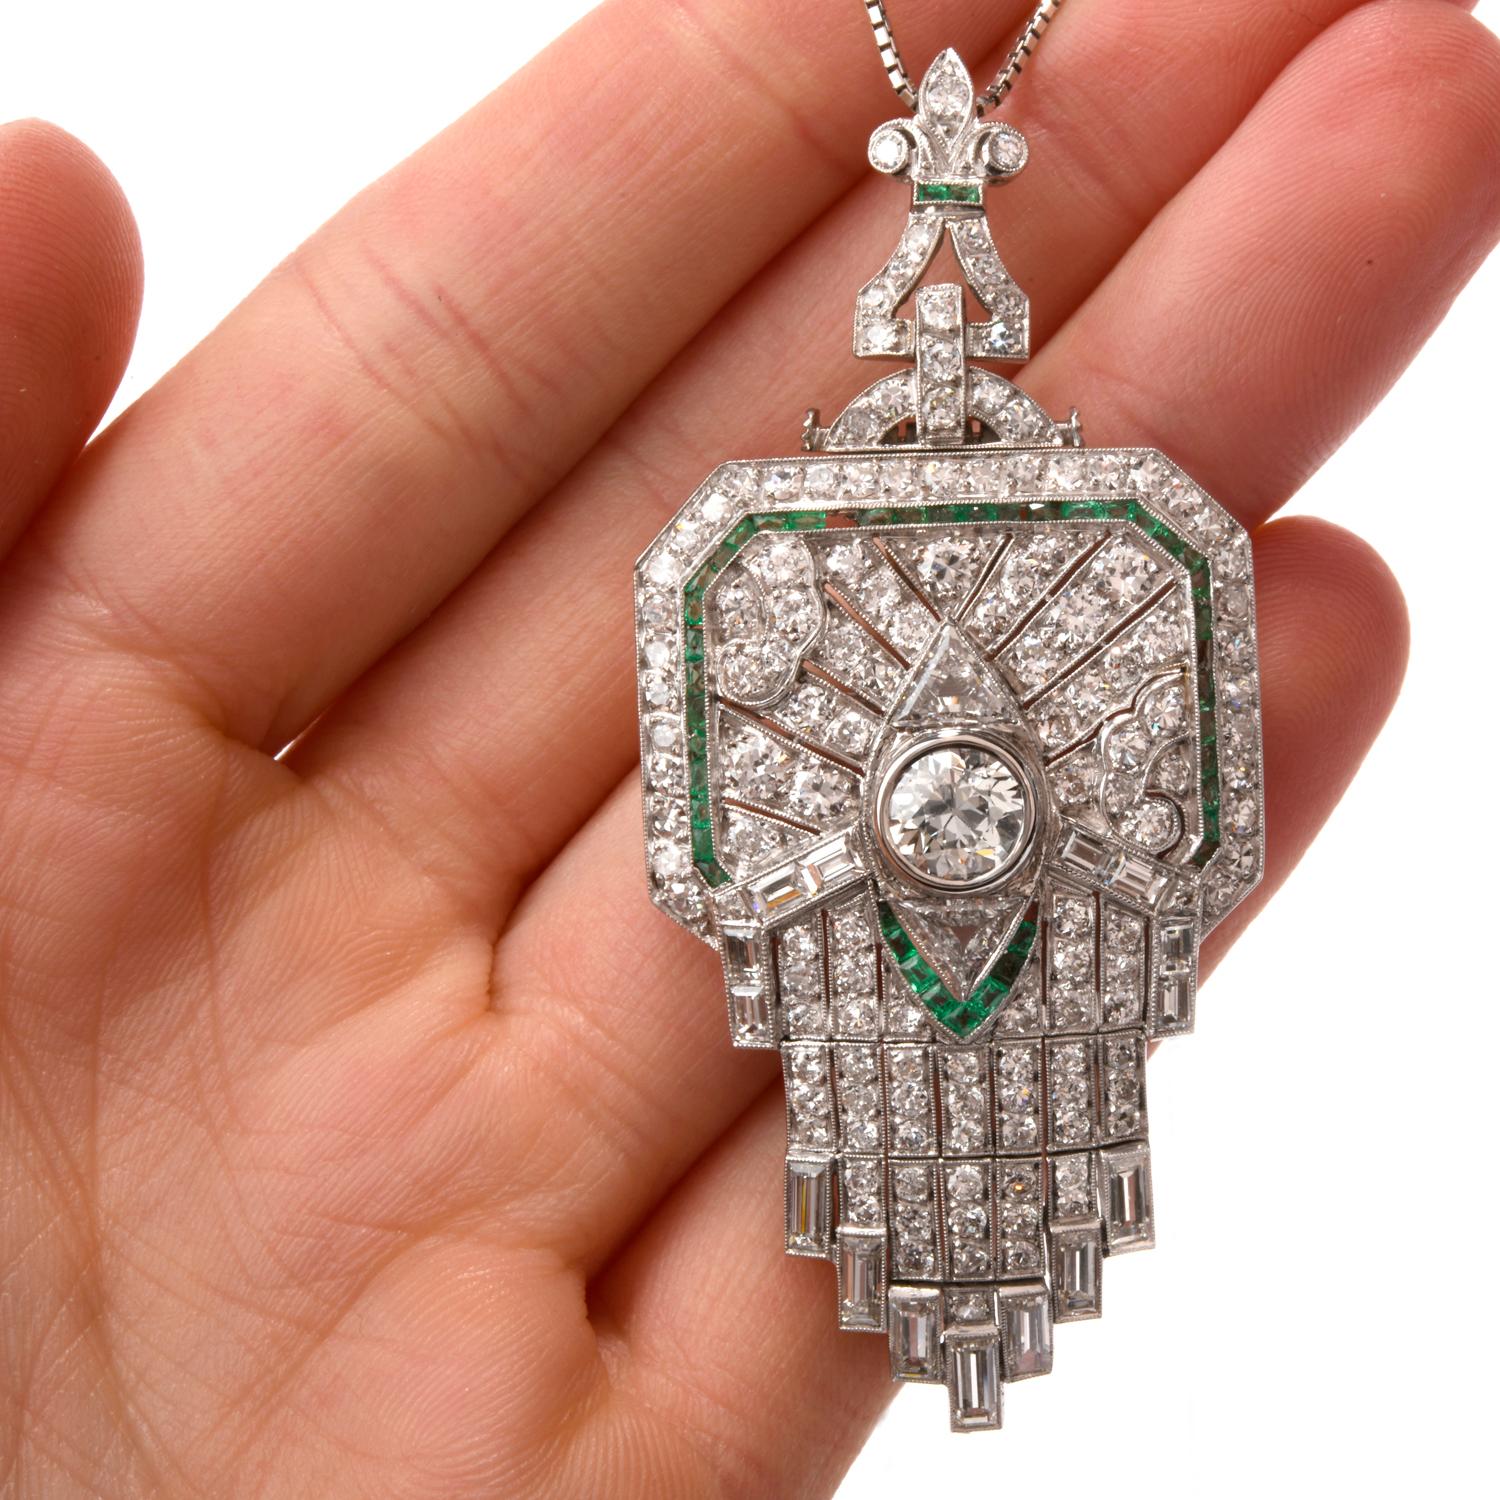 This Antique Deco Diamond and Emerald Brooch/Pendant was inspired in an Art Deco design featuring a Fleur De Lis top and is crafted in Luxurious Platinum.   This stately piece is able to be worn as a brooch or pendant.

Featured in the center is one